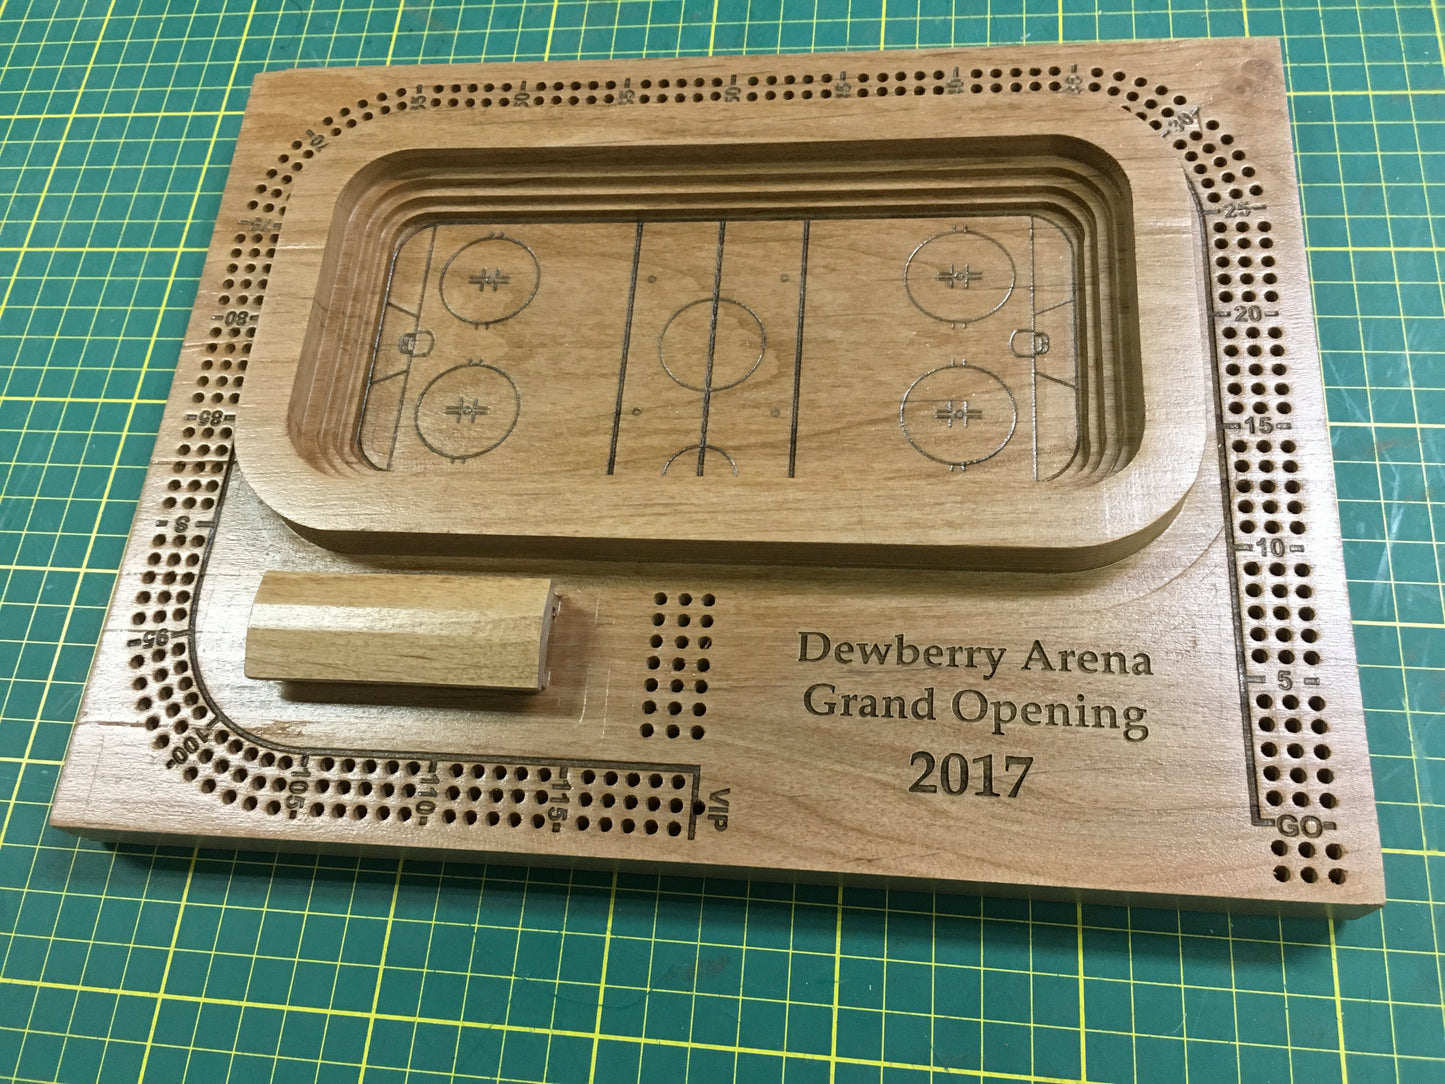 Board Text Engraving Arena / Stadium (or other)